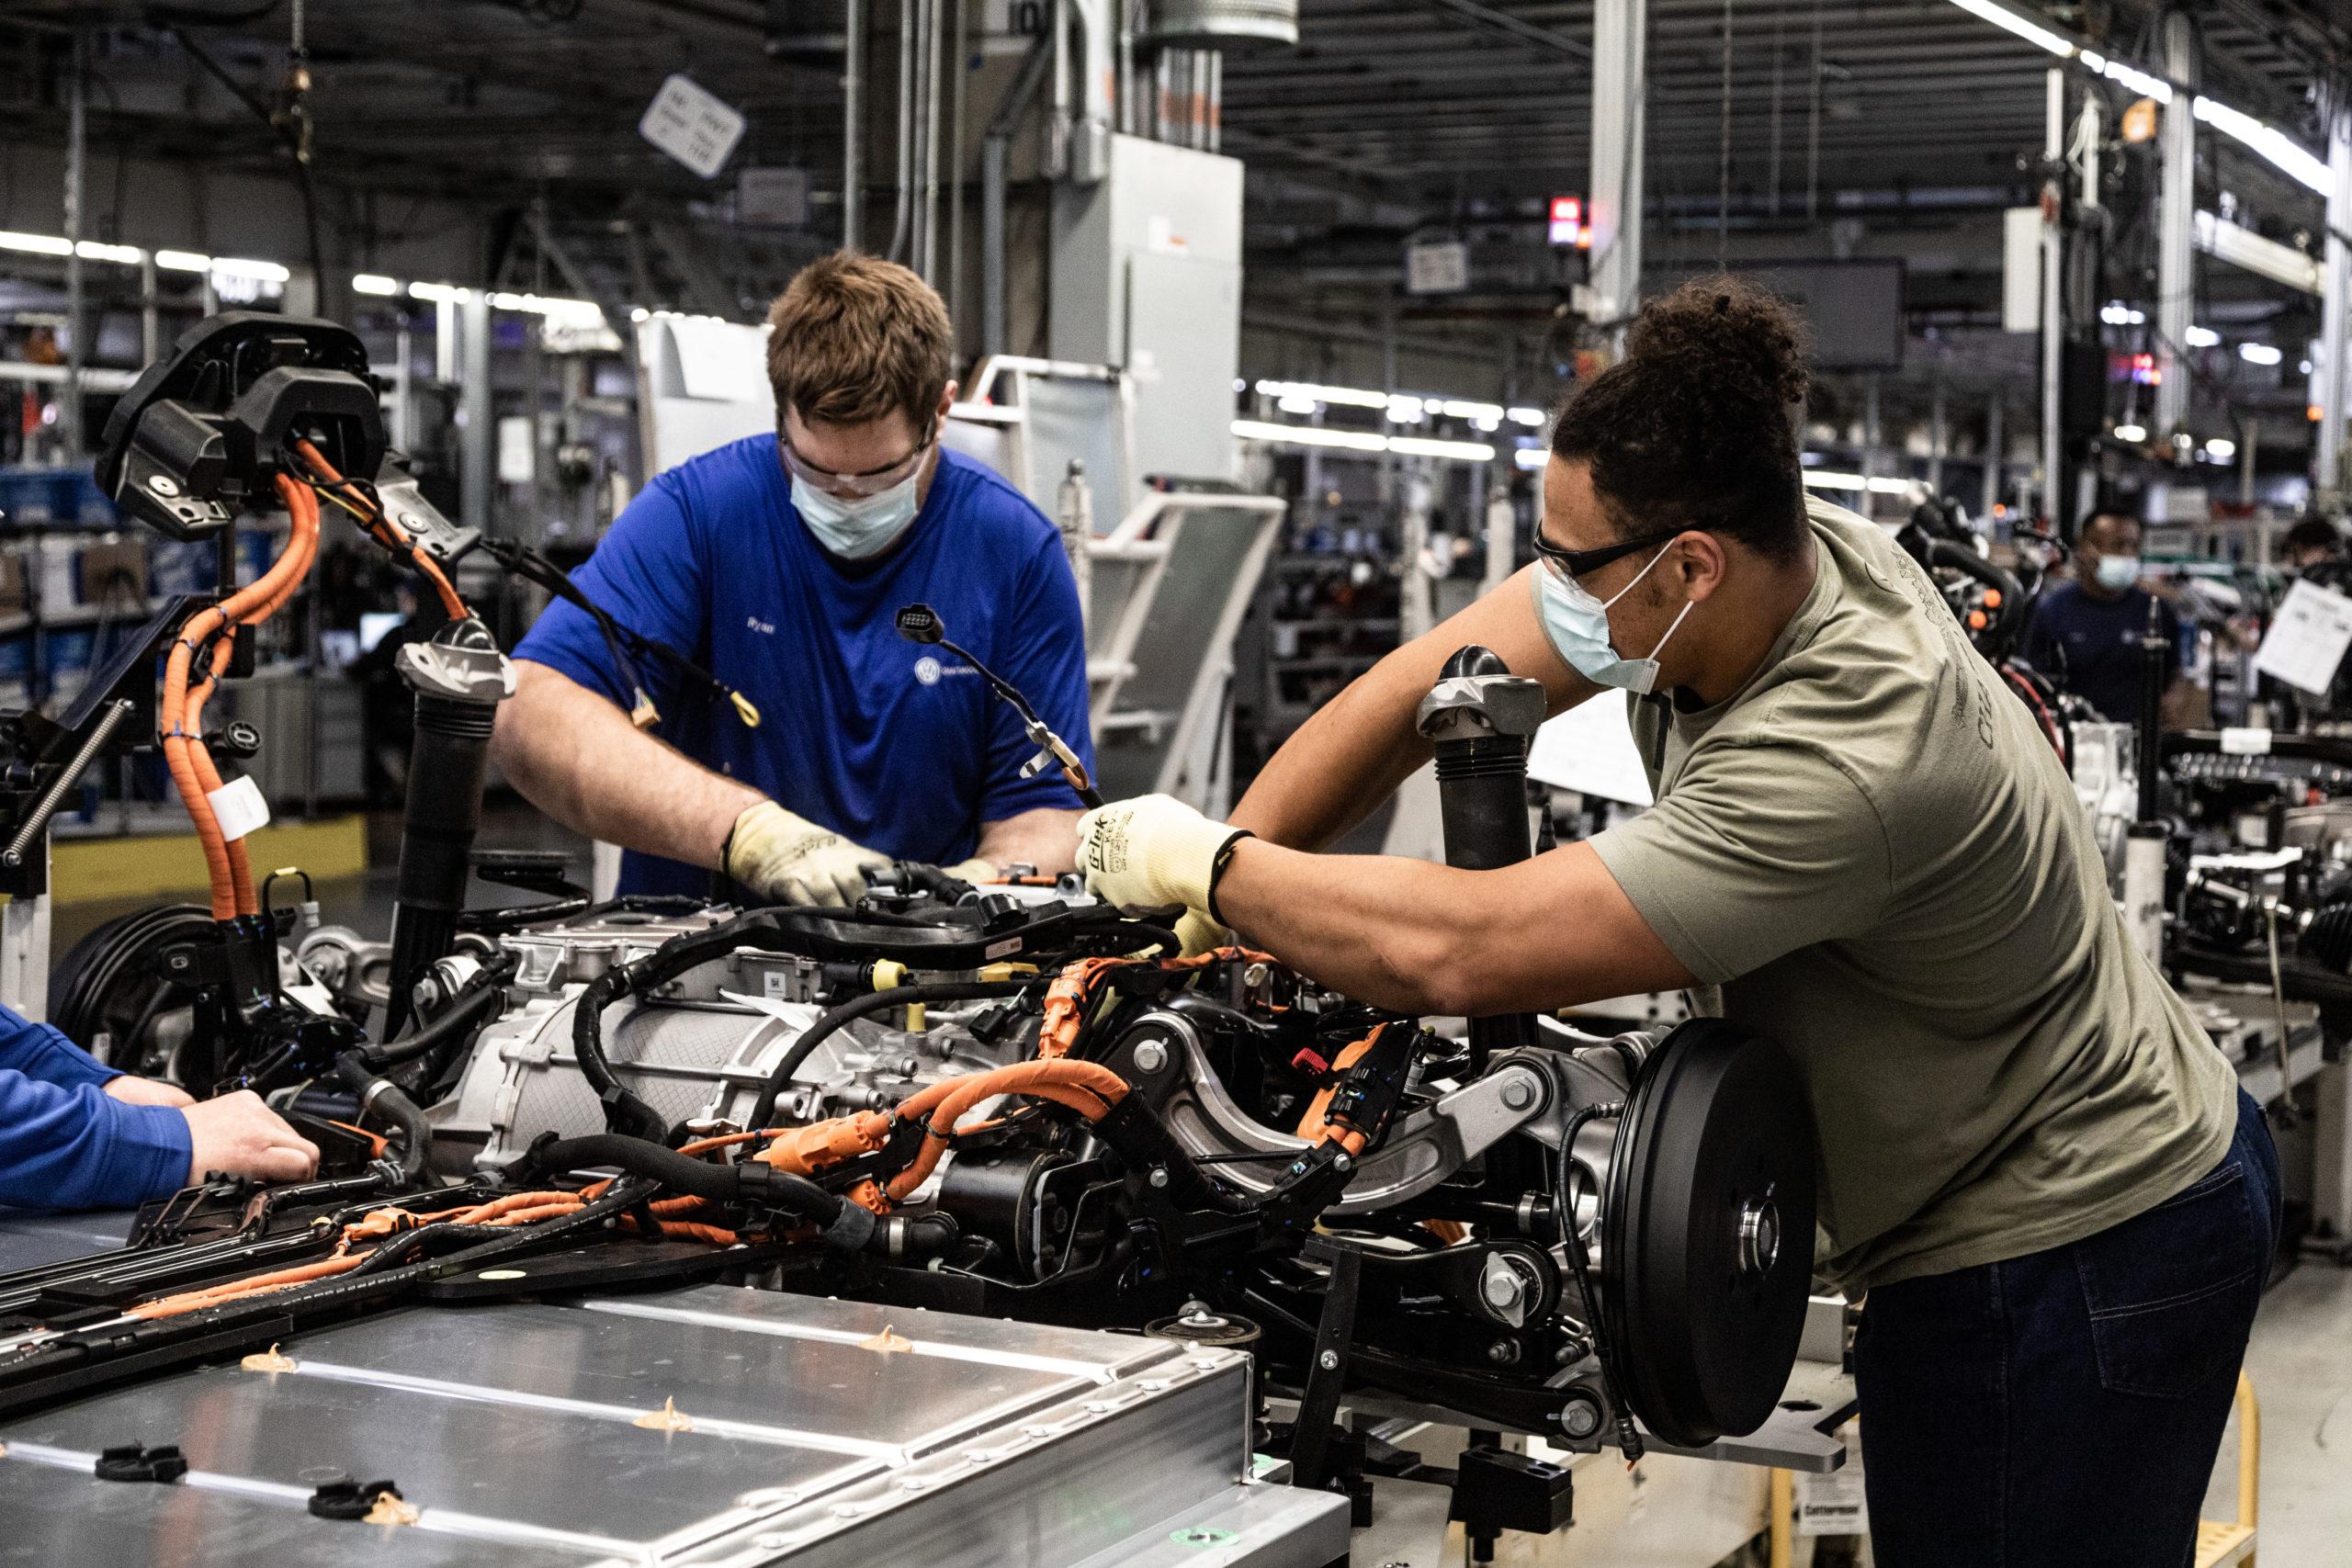 Assembly of Volkswagen’s ID.4 electric SUV at Volkswagen’s Chattanooga, TN, facilities